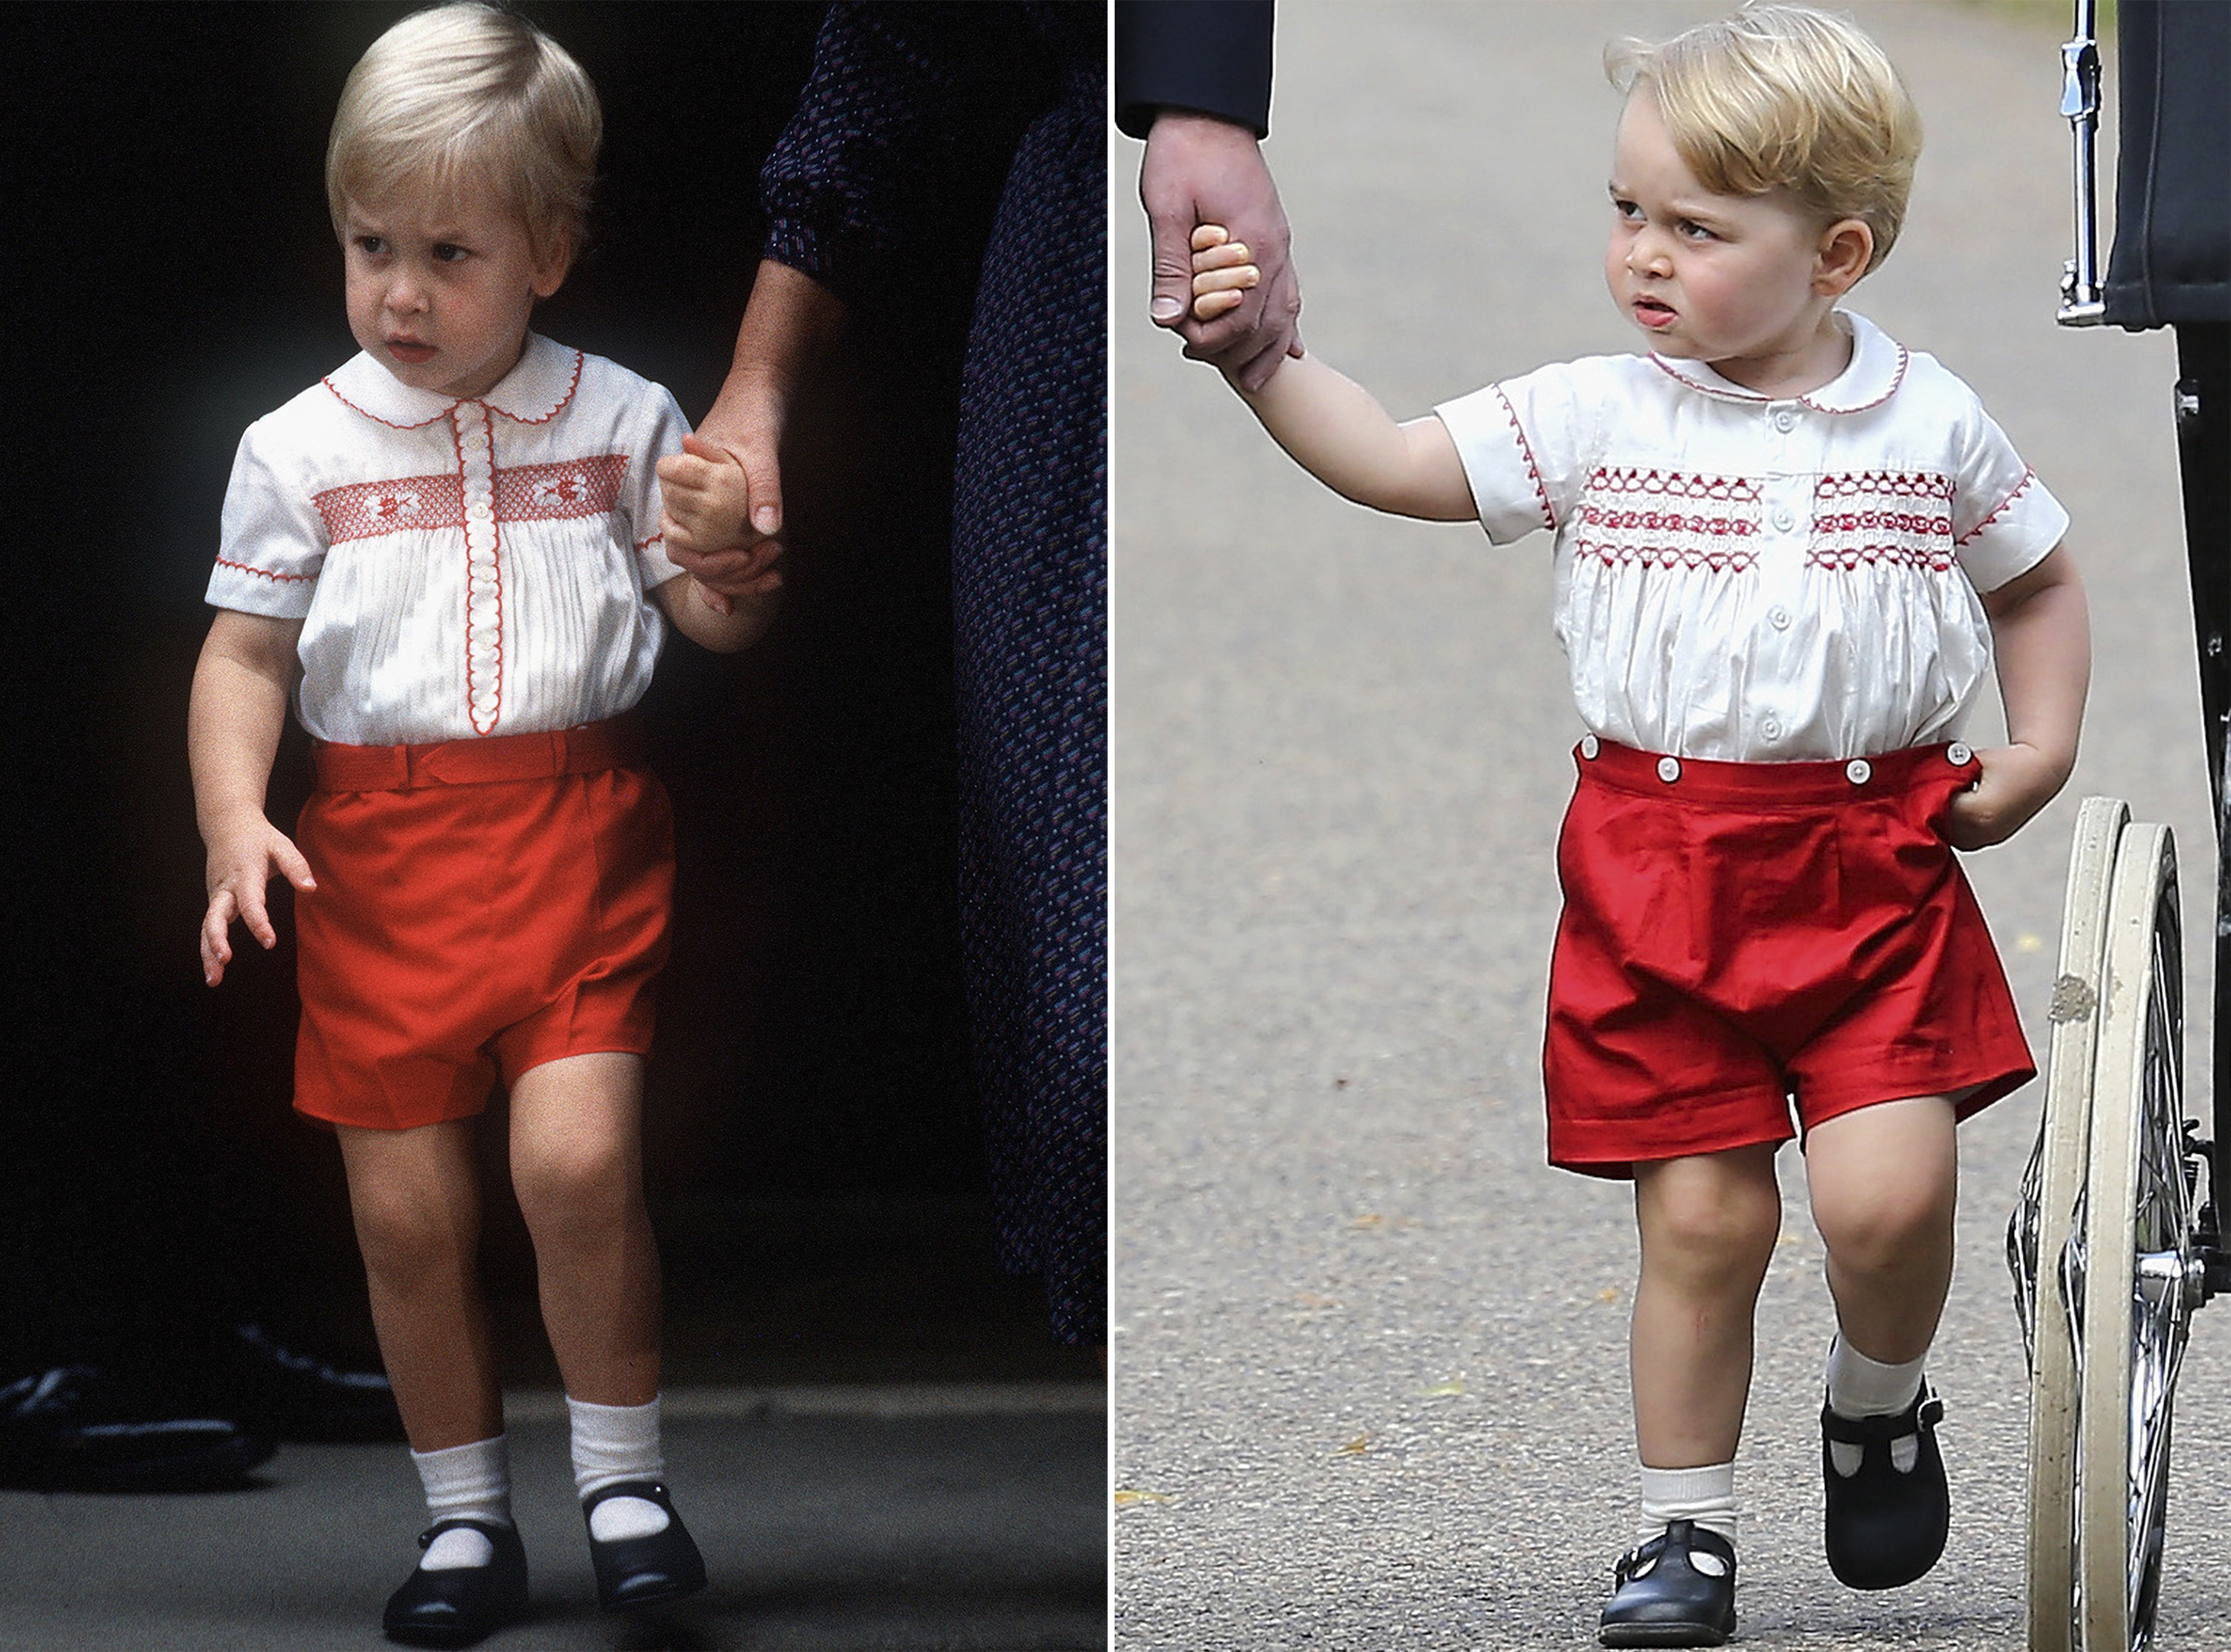 Left: Prince William leaves St. Mary's Hospital after visiting his newborn brother, Prince Harry, in London, Sept. 16, 1984. Right: Prince Goerge arrives with his mother, Catherine, Duchess of Cambridge, to the Church of St. Mary Magdalene on the Sandringham Estate for the christening of his sister, Princess Charlotte, in King's Lynn, England, July 5, 2015.